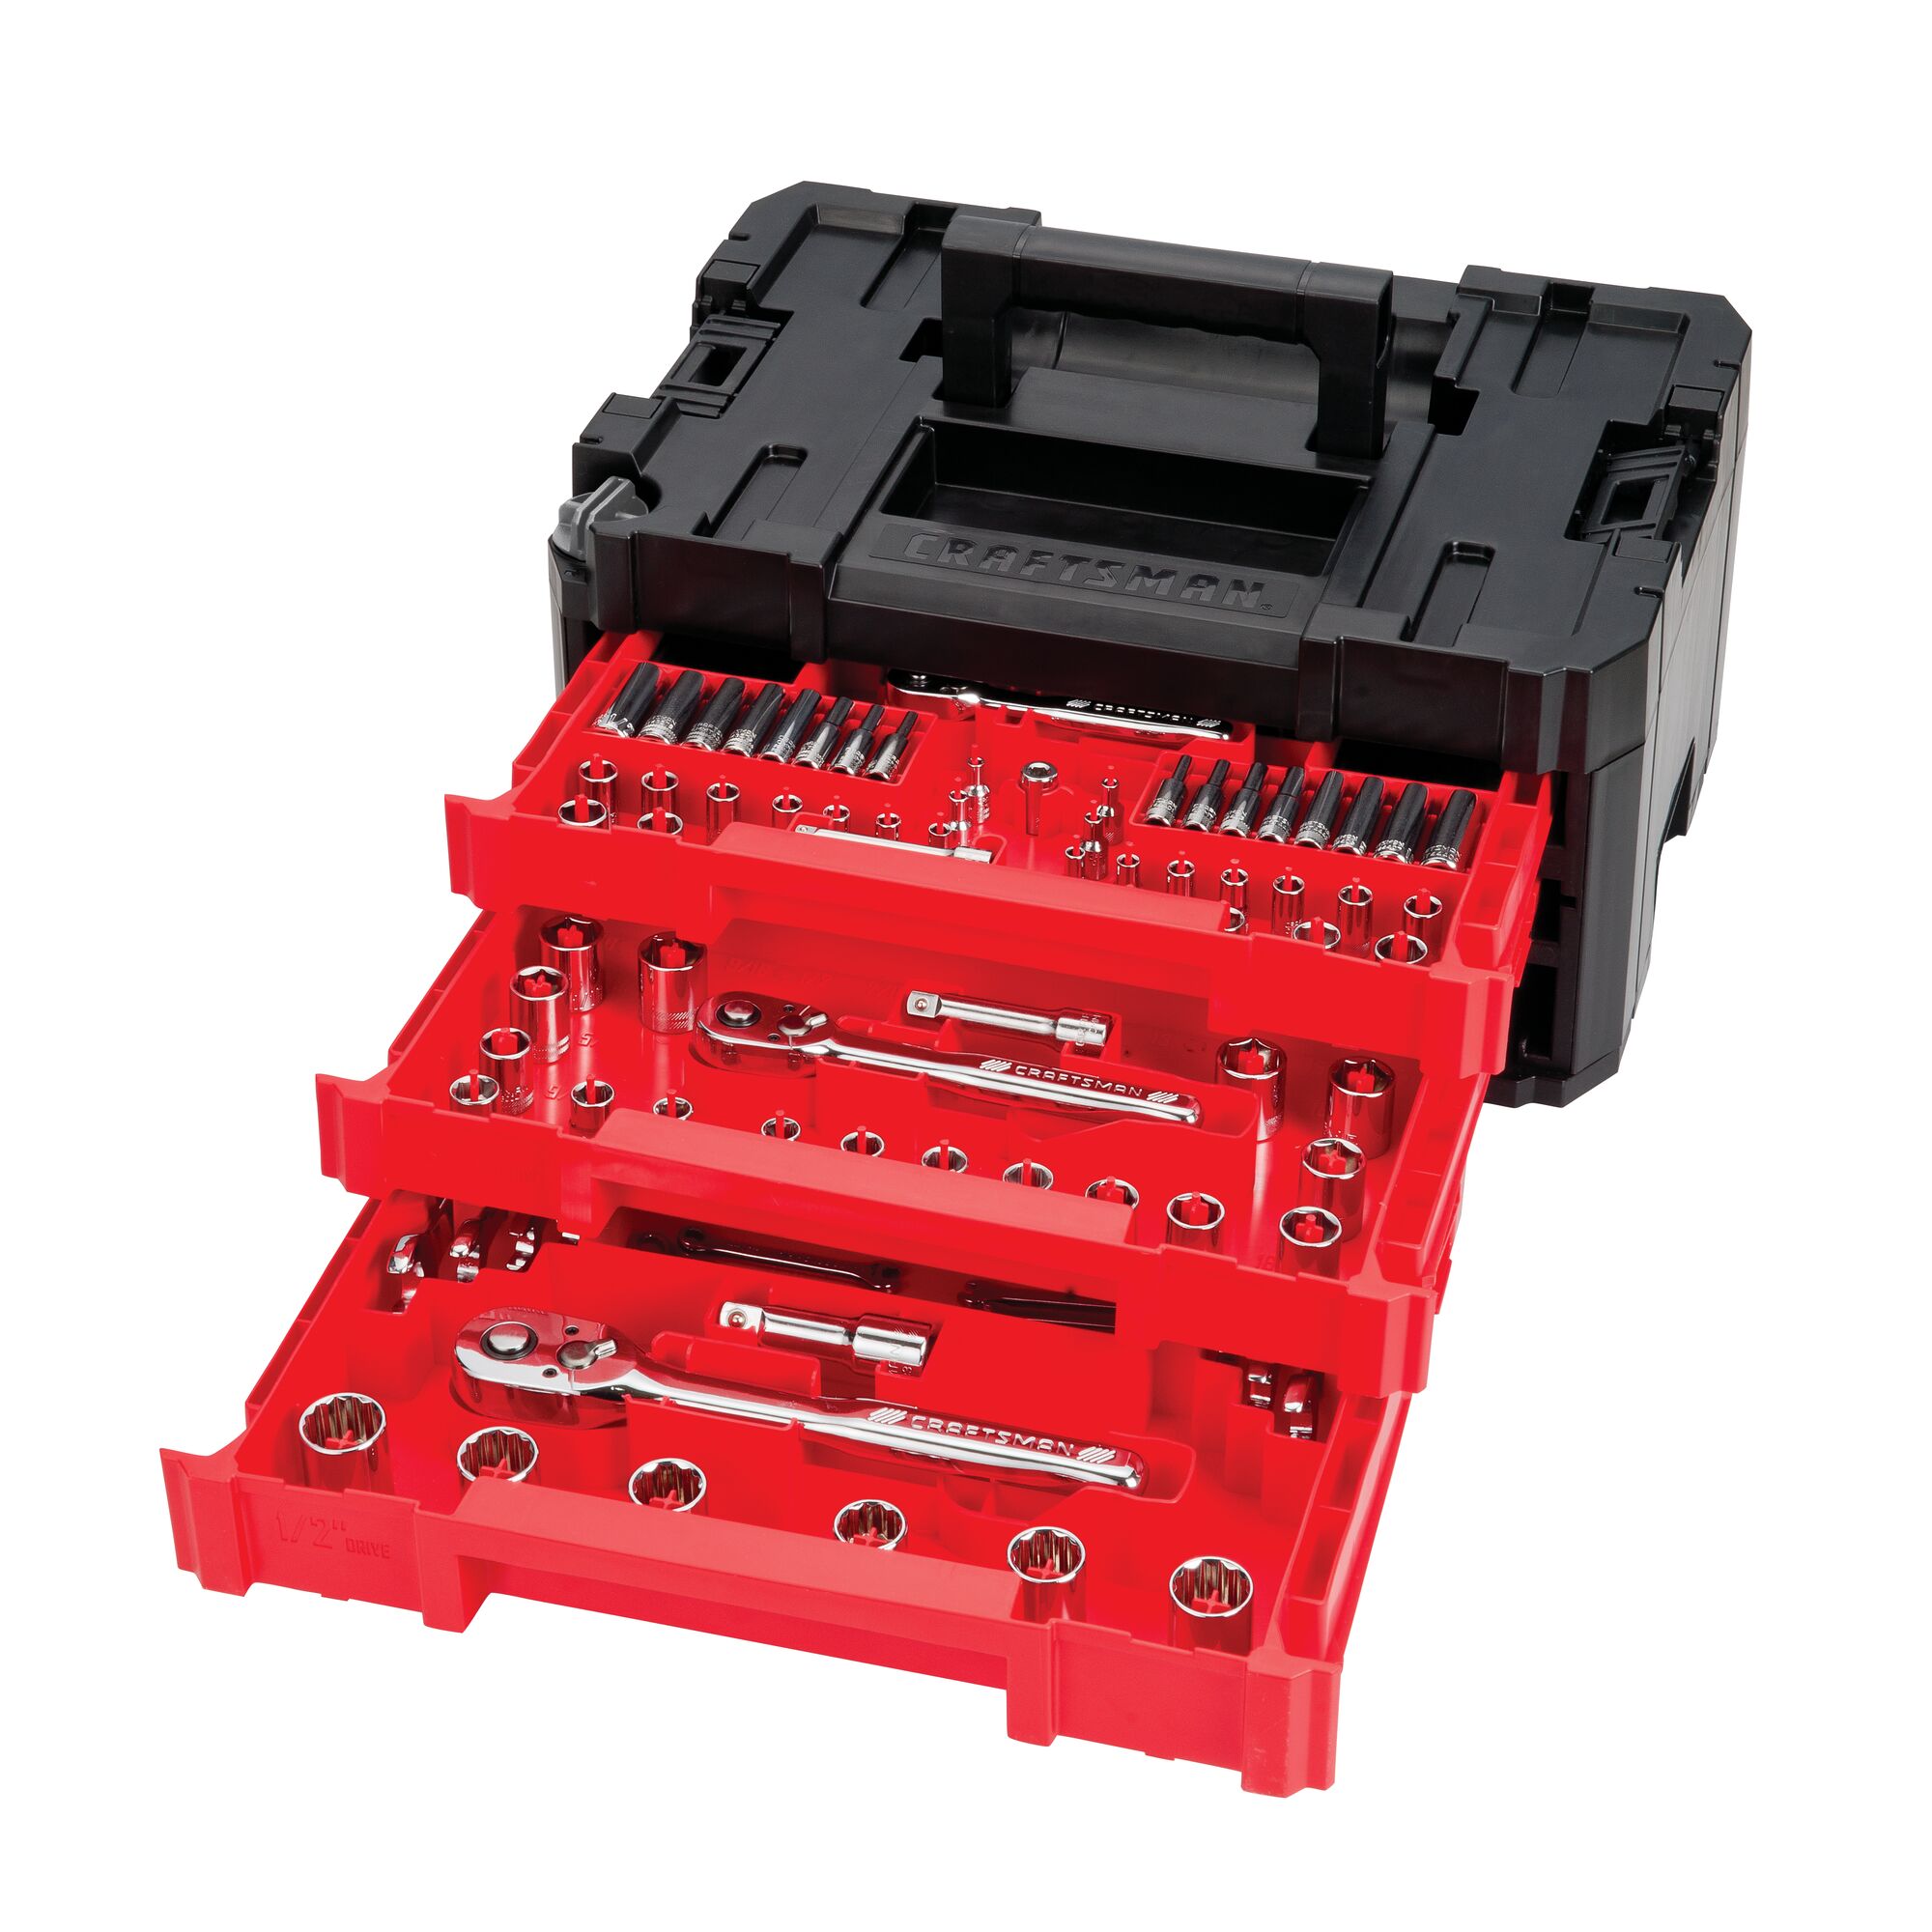 Layout of the contents of the CRAFTSMAN VERSASTACK 230 piece 3-Drawer Mechanic Tool Set.